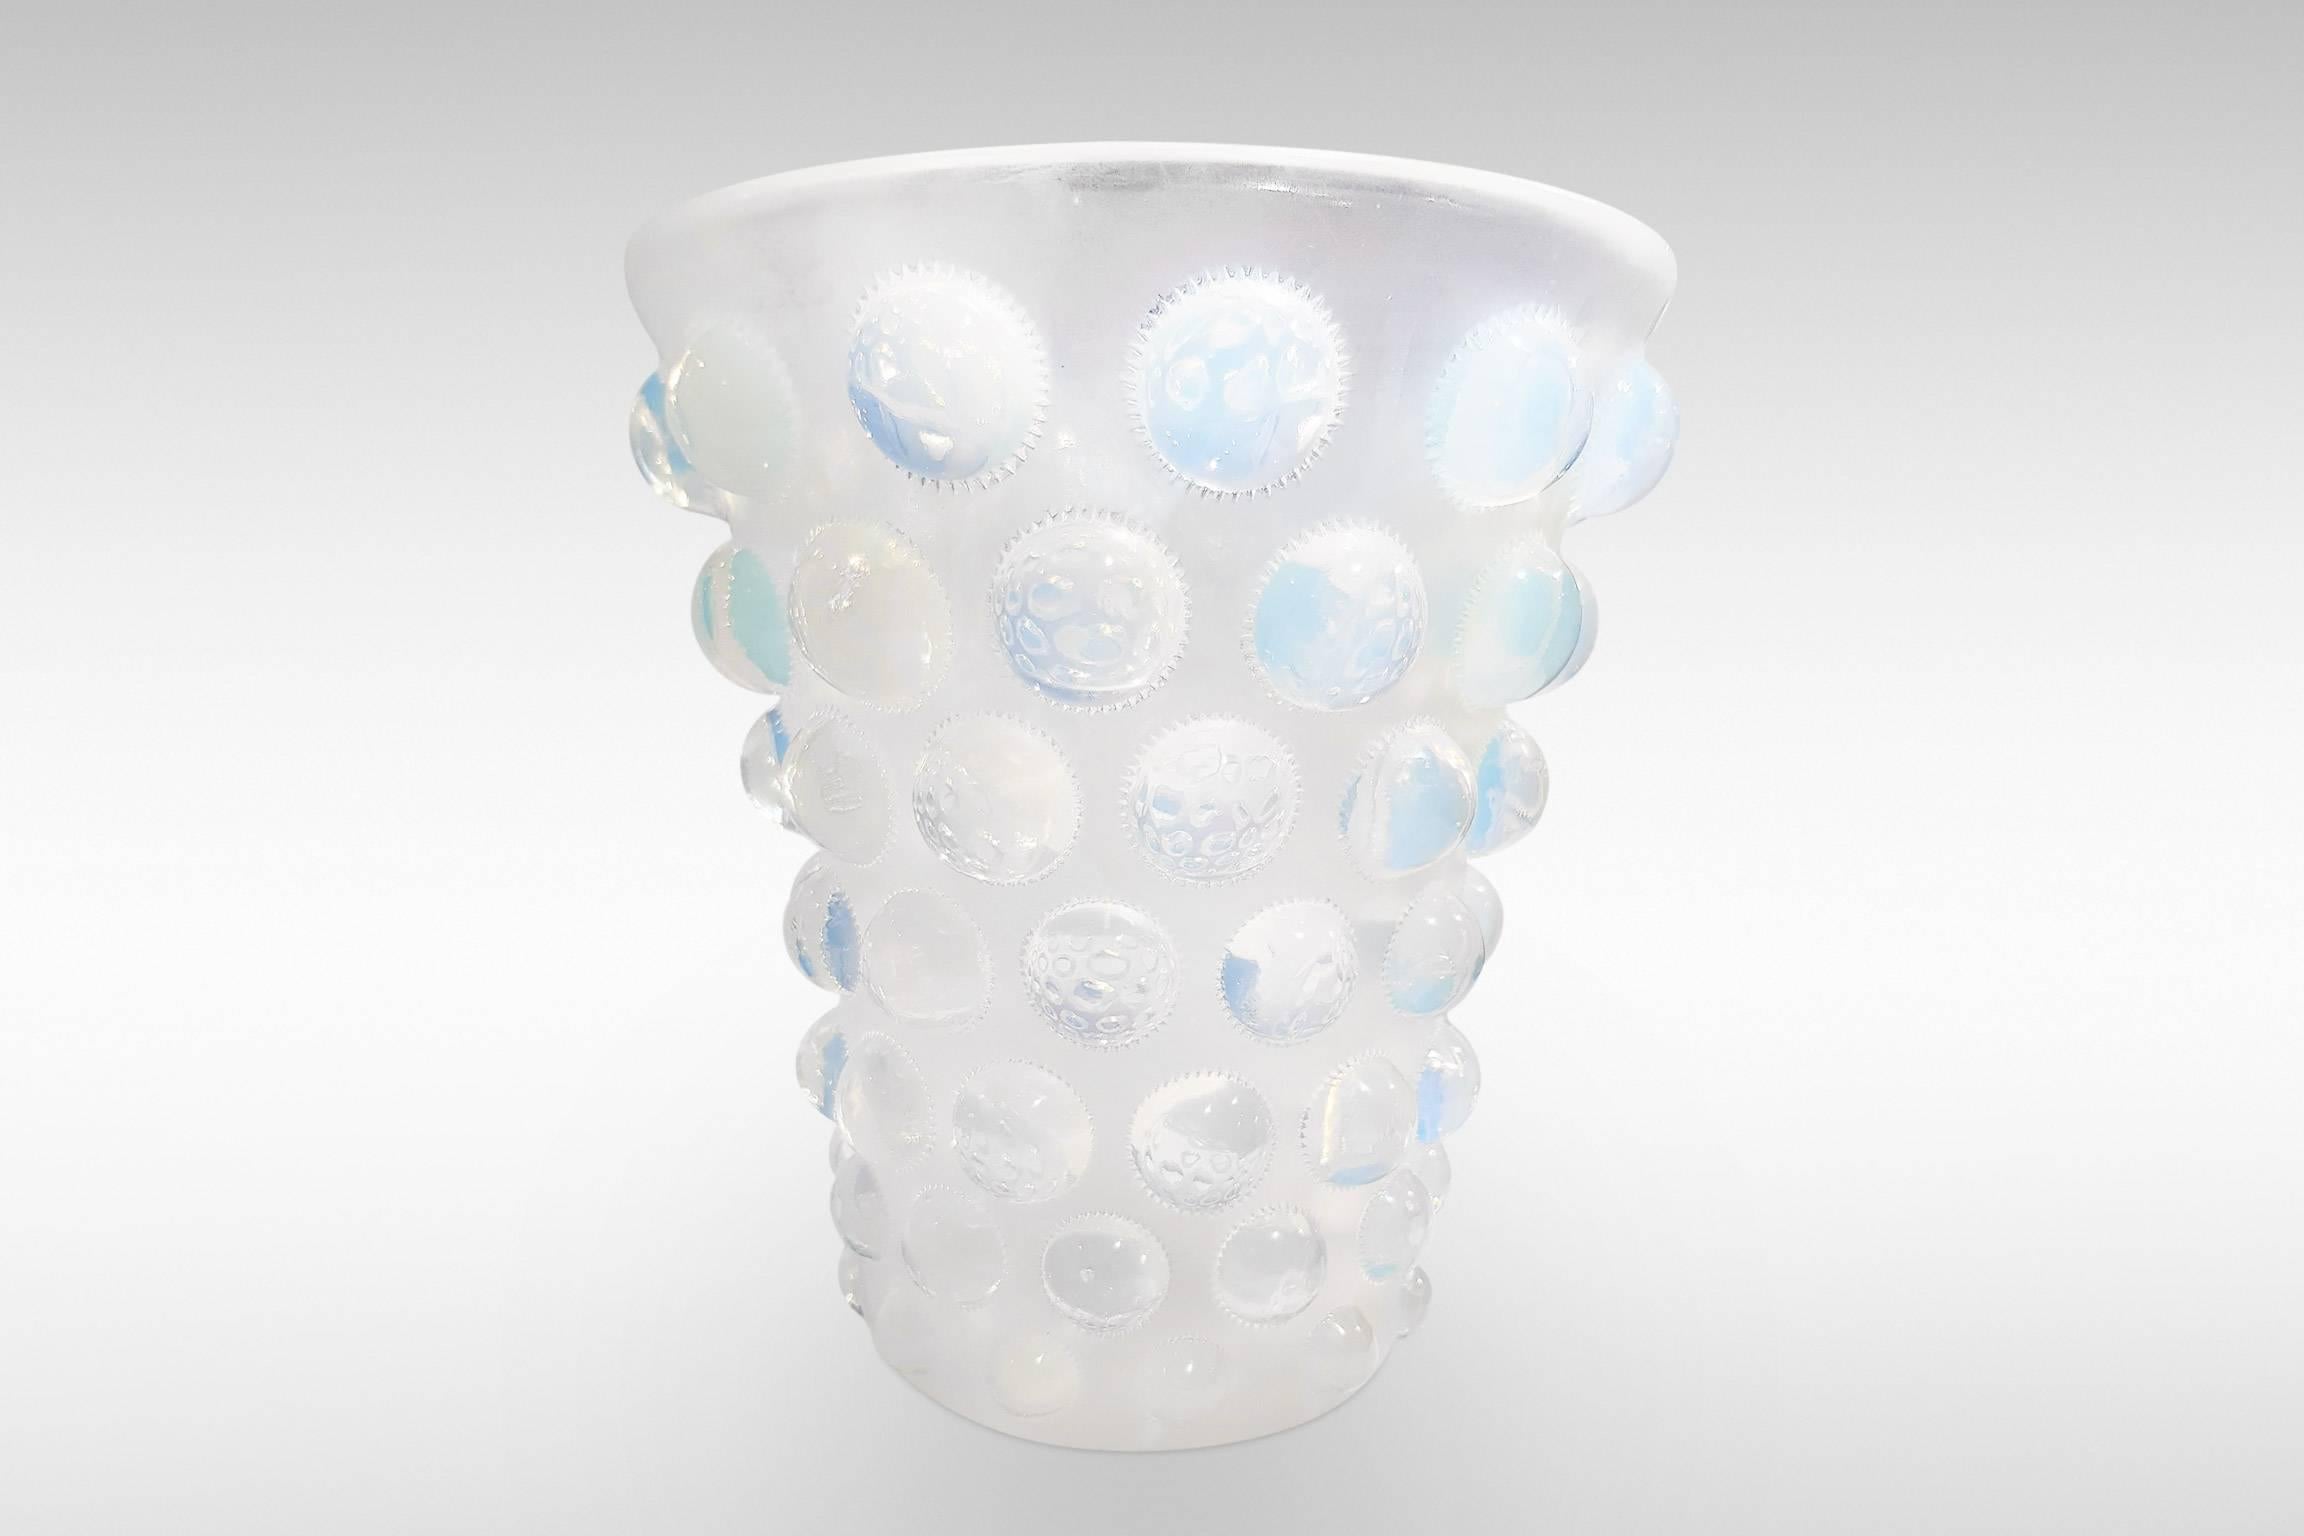 'Bammako' by Rene Lalique is a striking Art Deco vase design with roundels in opalescent glass,
circa 1930, signed.